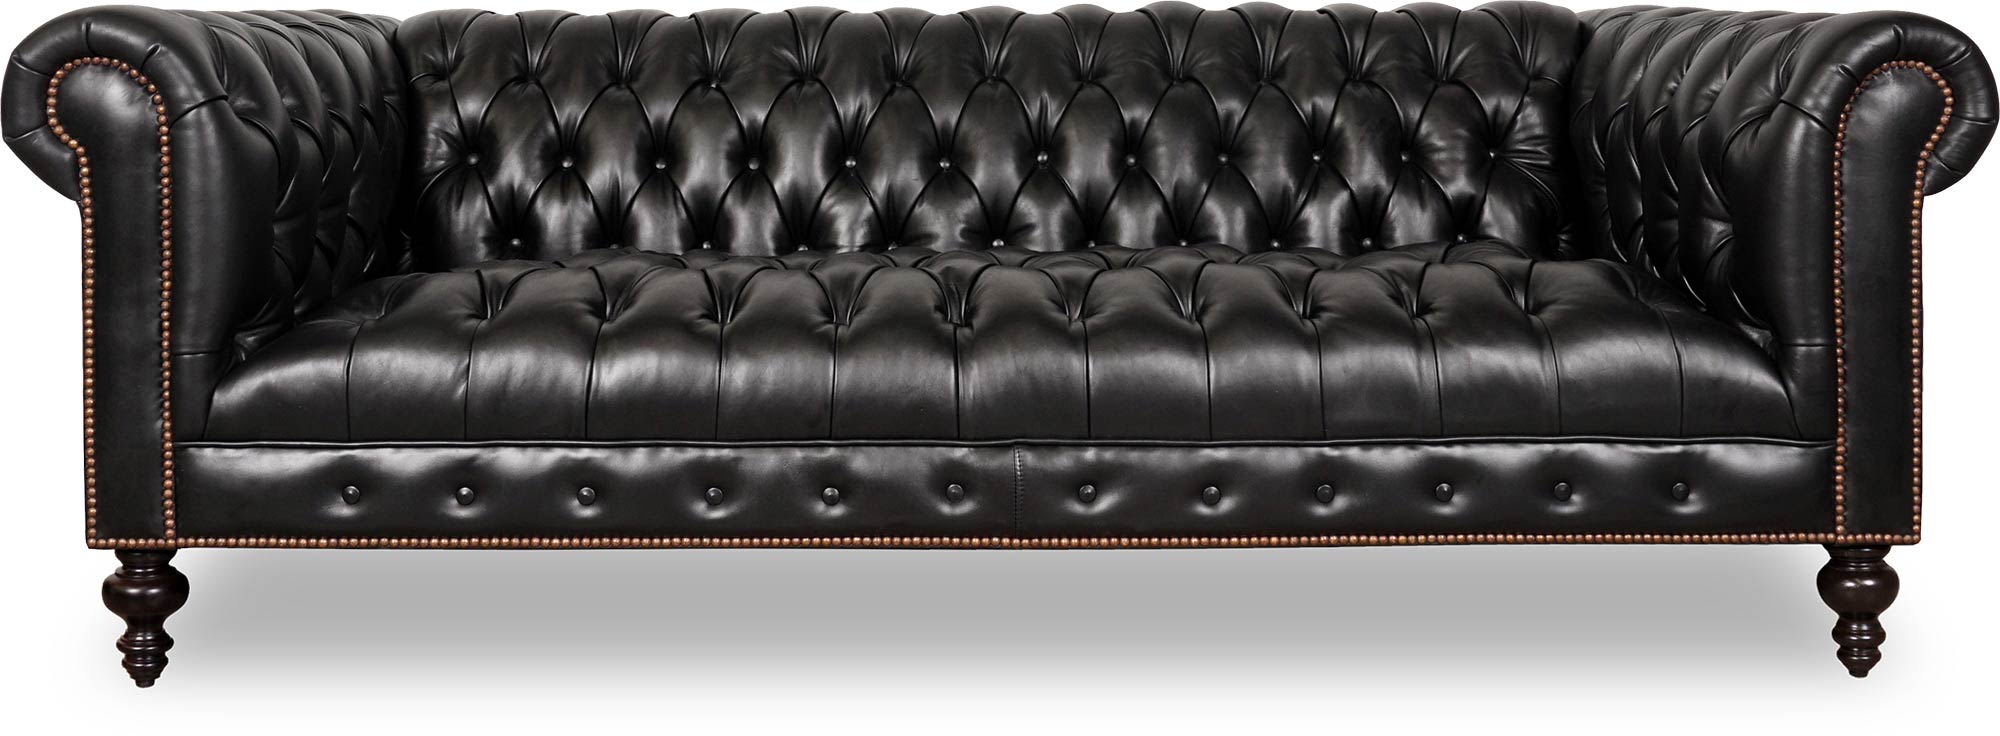 Chesterfield Sofas Armchairs, Black Leather Tufted Sectional Sofa